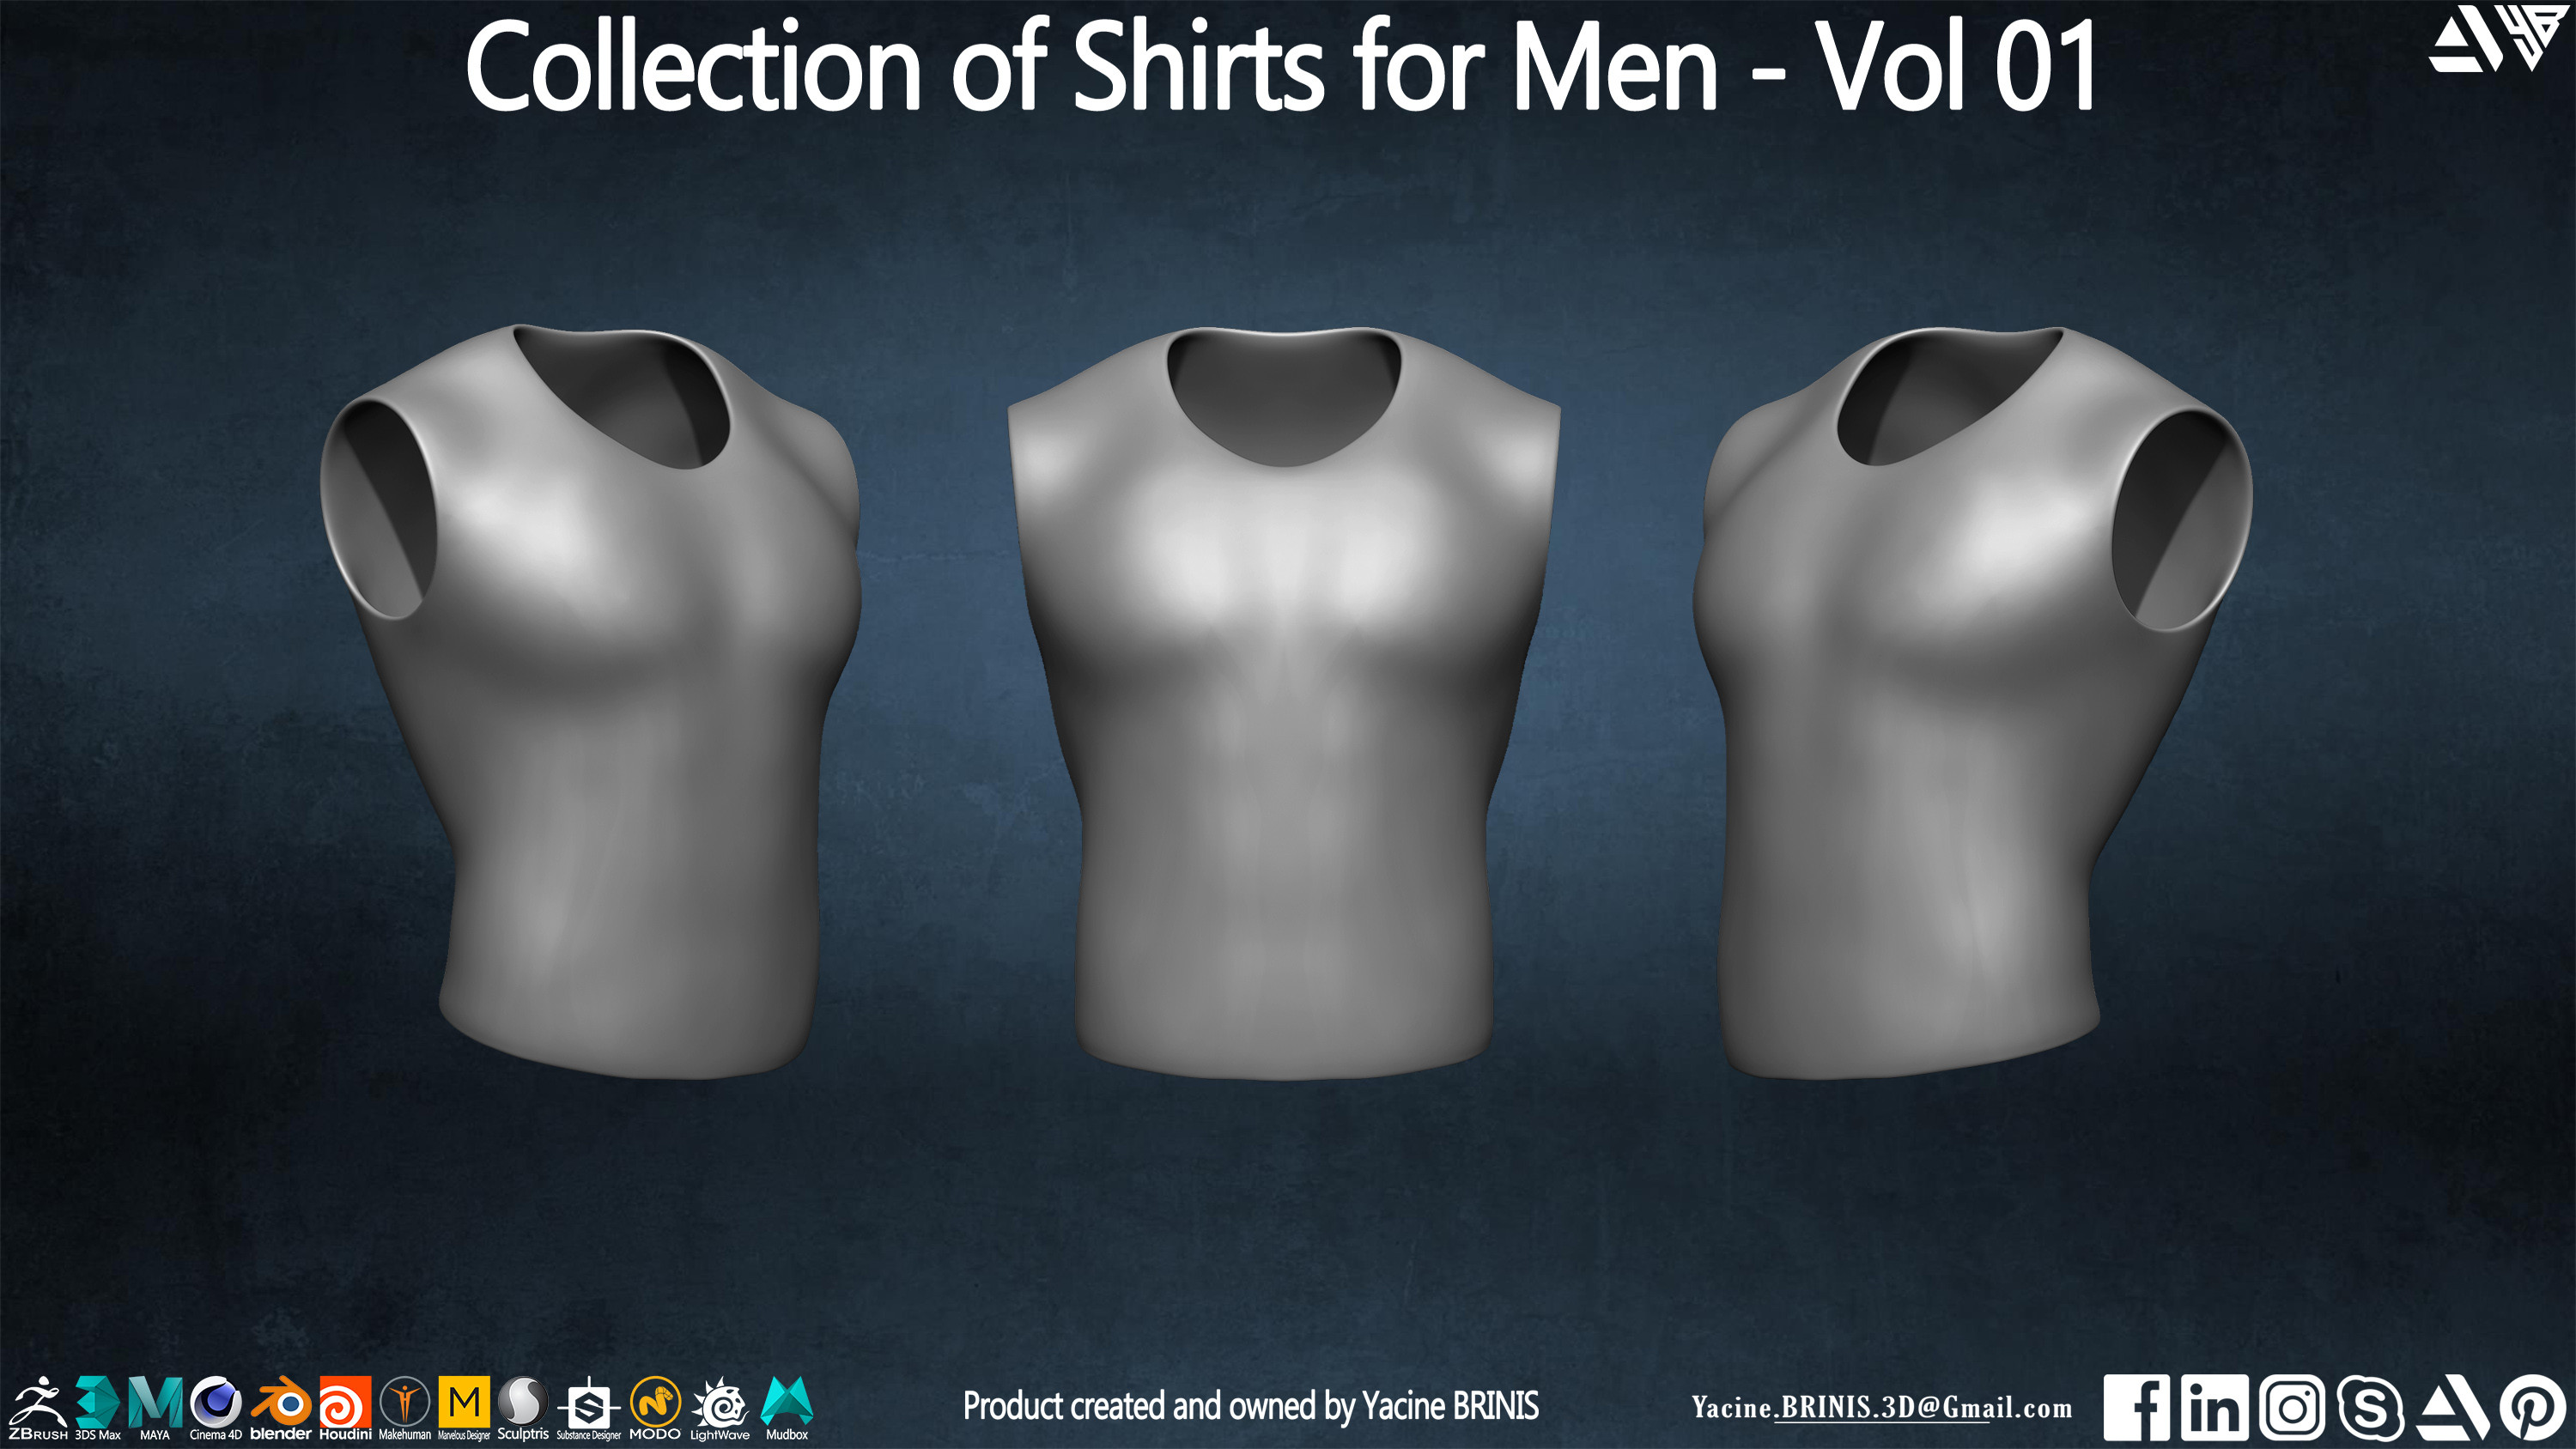 Collection of Shirts for Men - Volume 01 By Yacine BRINIS - 004